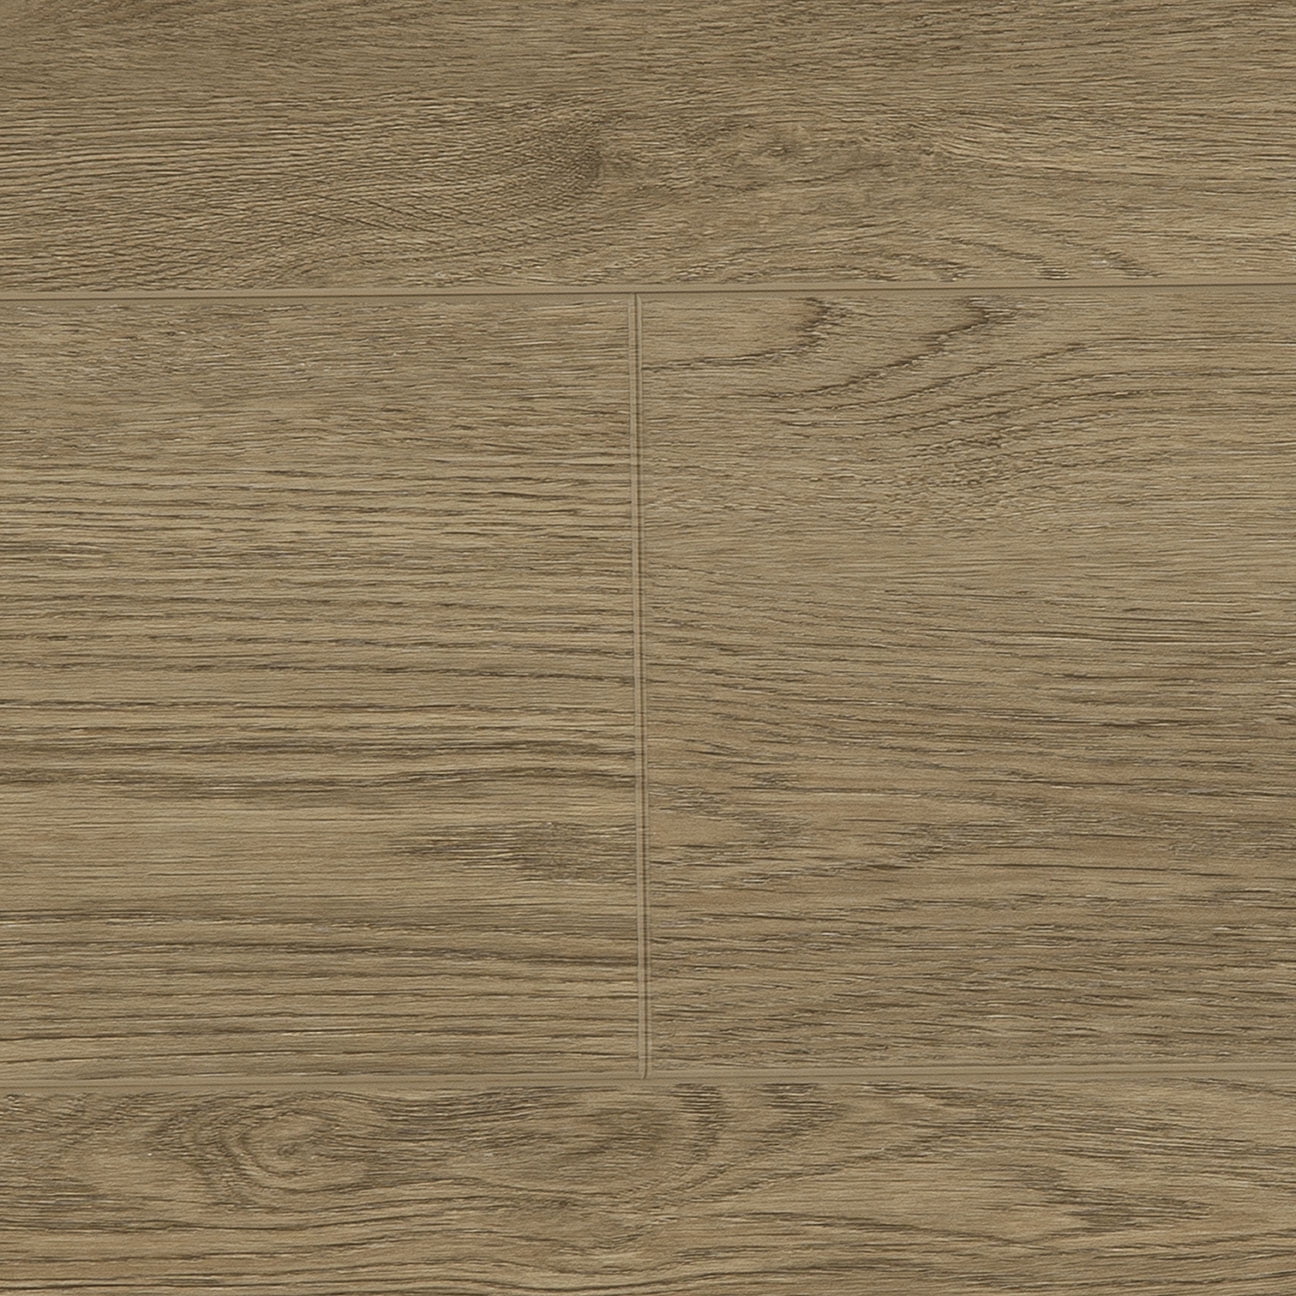 Pacific Crest Bsv-811062 9 inch x 60 inch Embossed Vinyl Flooring - Cathedral, Size: Box